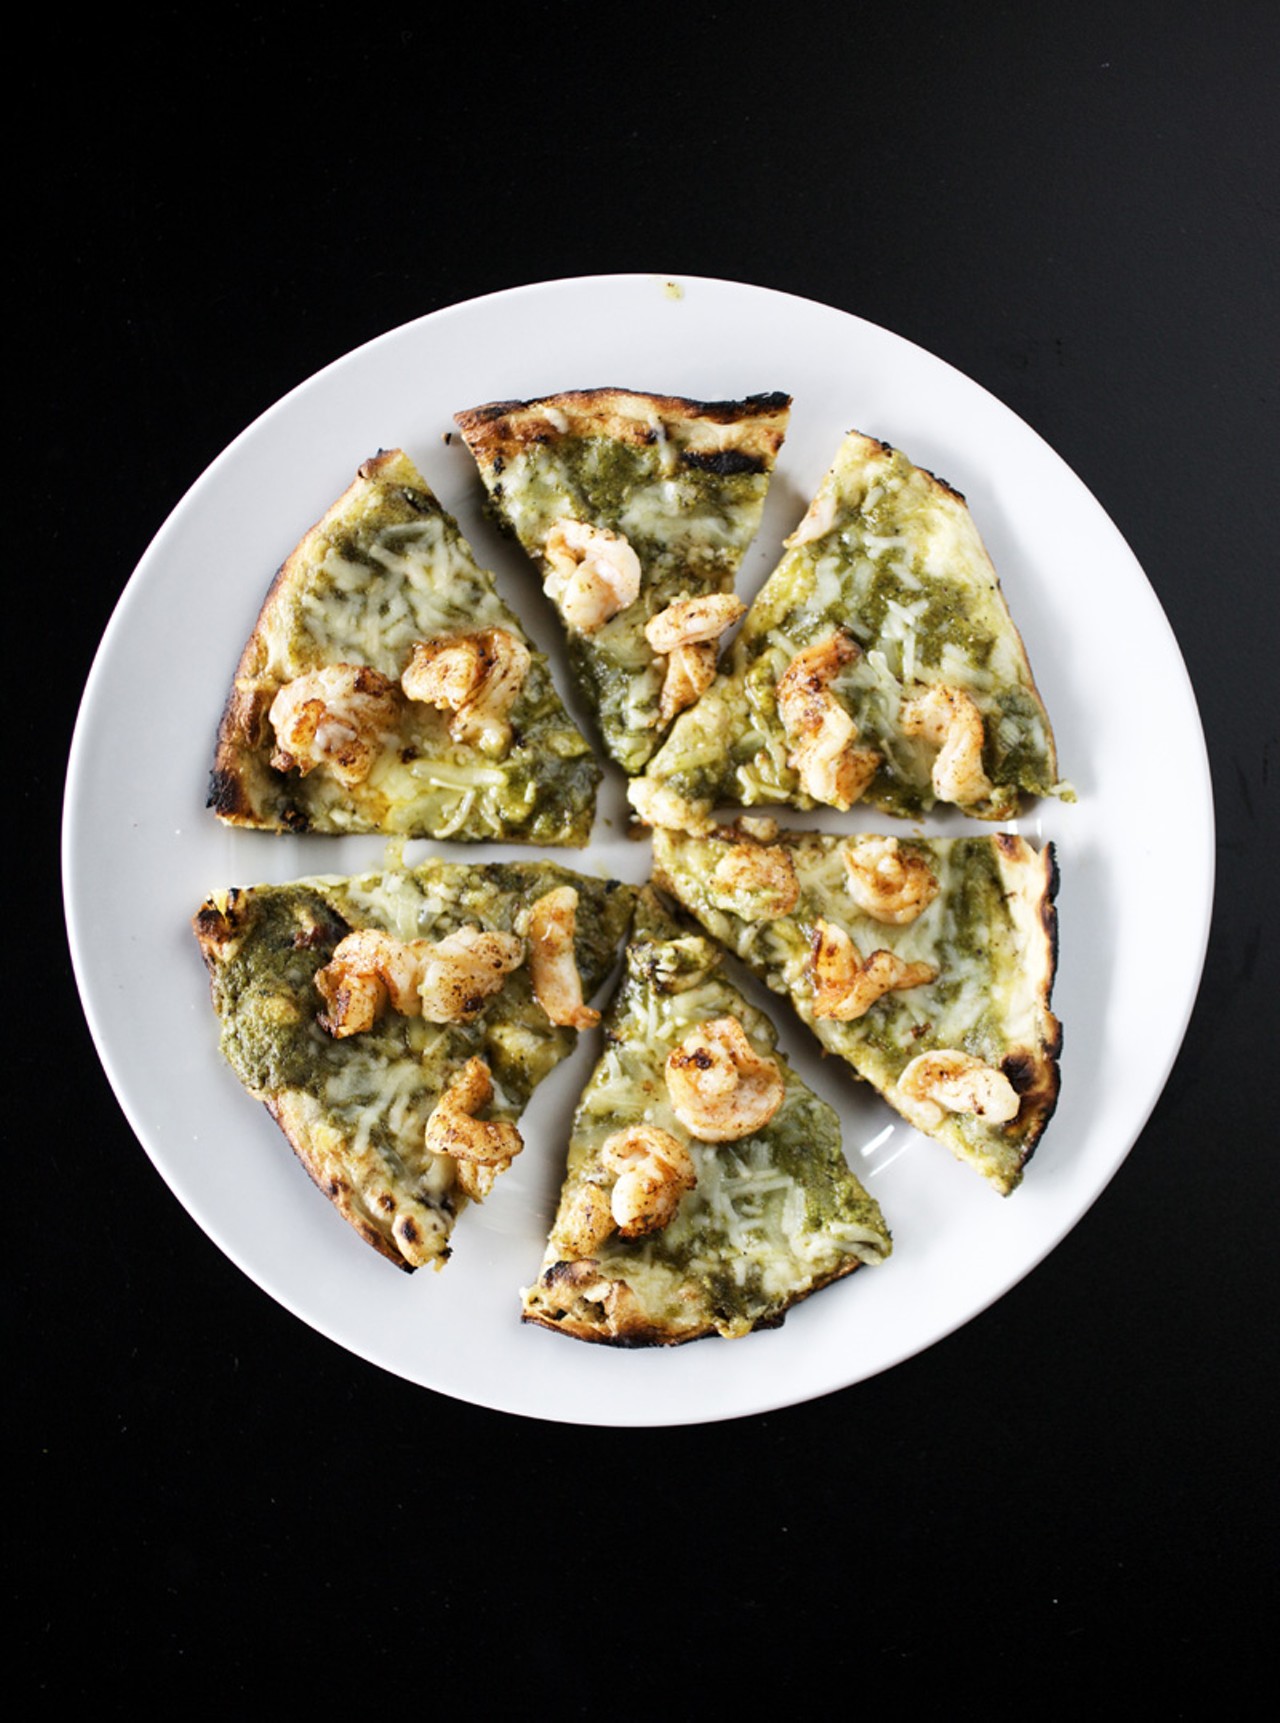 The Shrimp Flatbread, one of the appetizers on the menu, is southwest spiced shrimp with pecan cilantro pesto, roasted garlic and cheese blend on grilled flatbread.